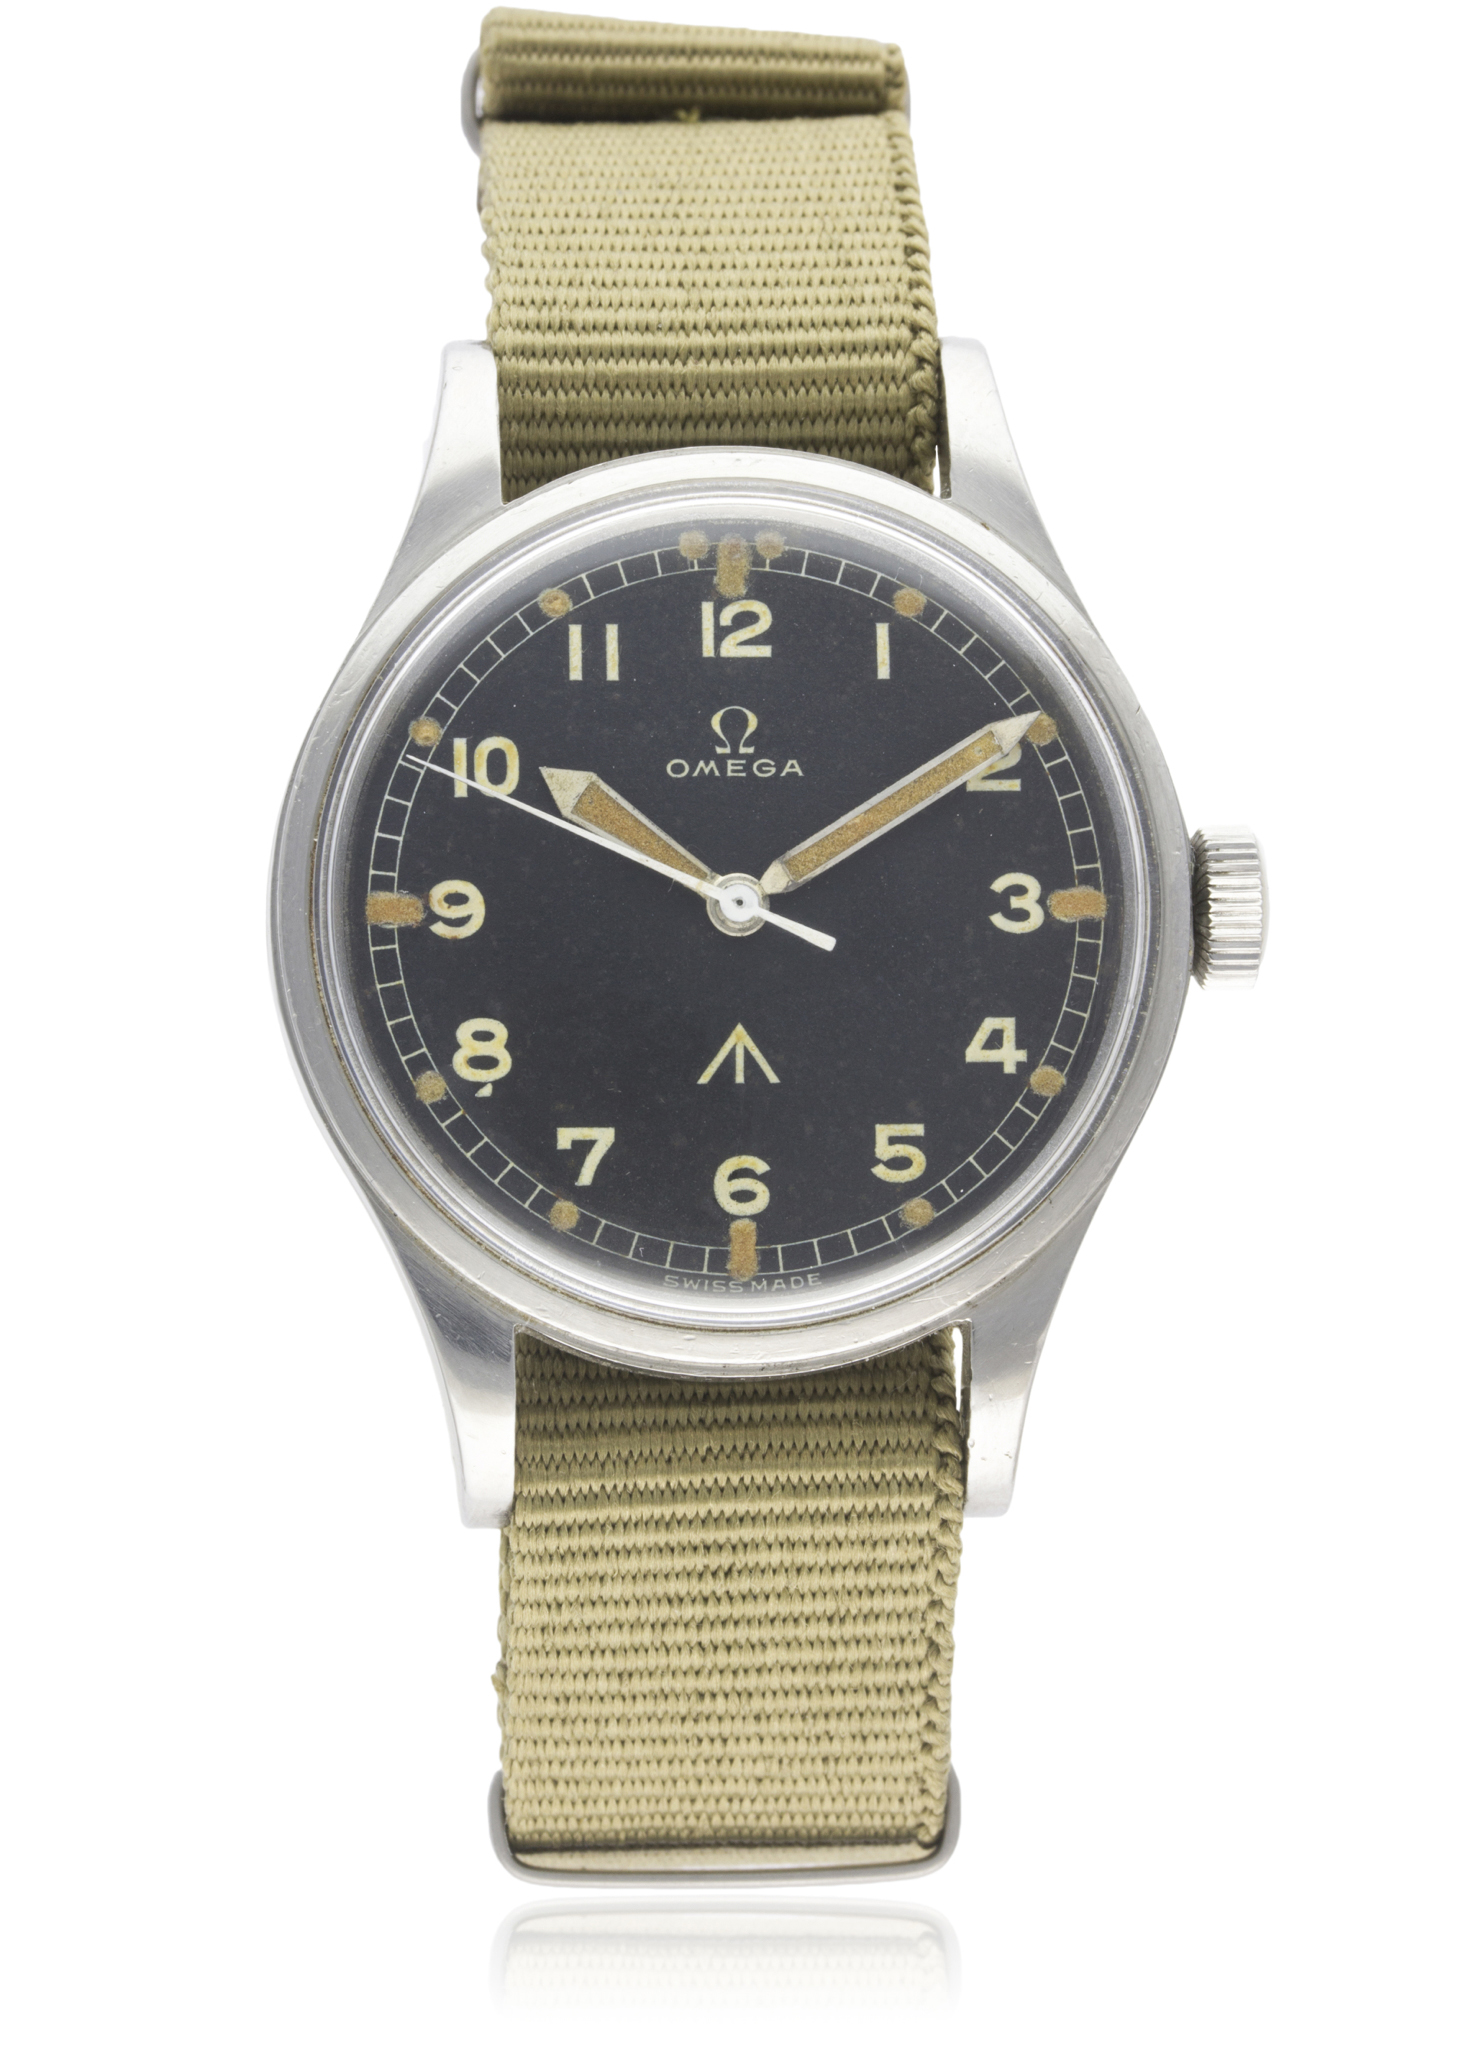 A VERY RARE GENTLEMAN'S STAINLESS STEEL BRITISH MILITARY OMEGA RAF "THIN ARROW" PILOTS WRIST WATCH - Image 2 of 9